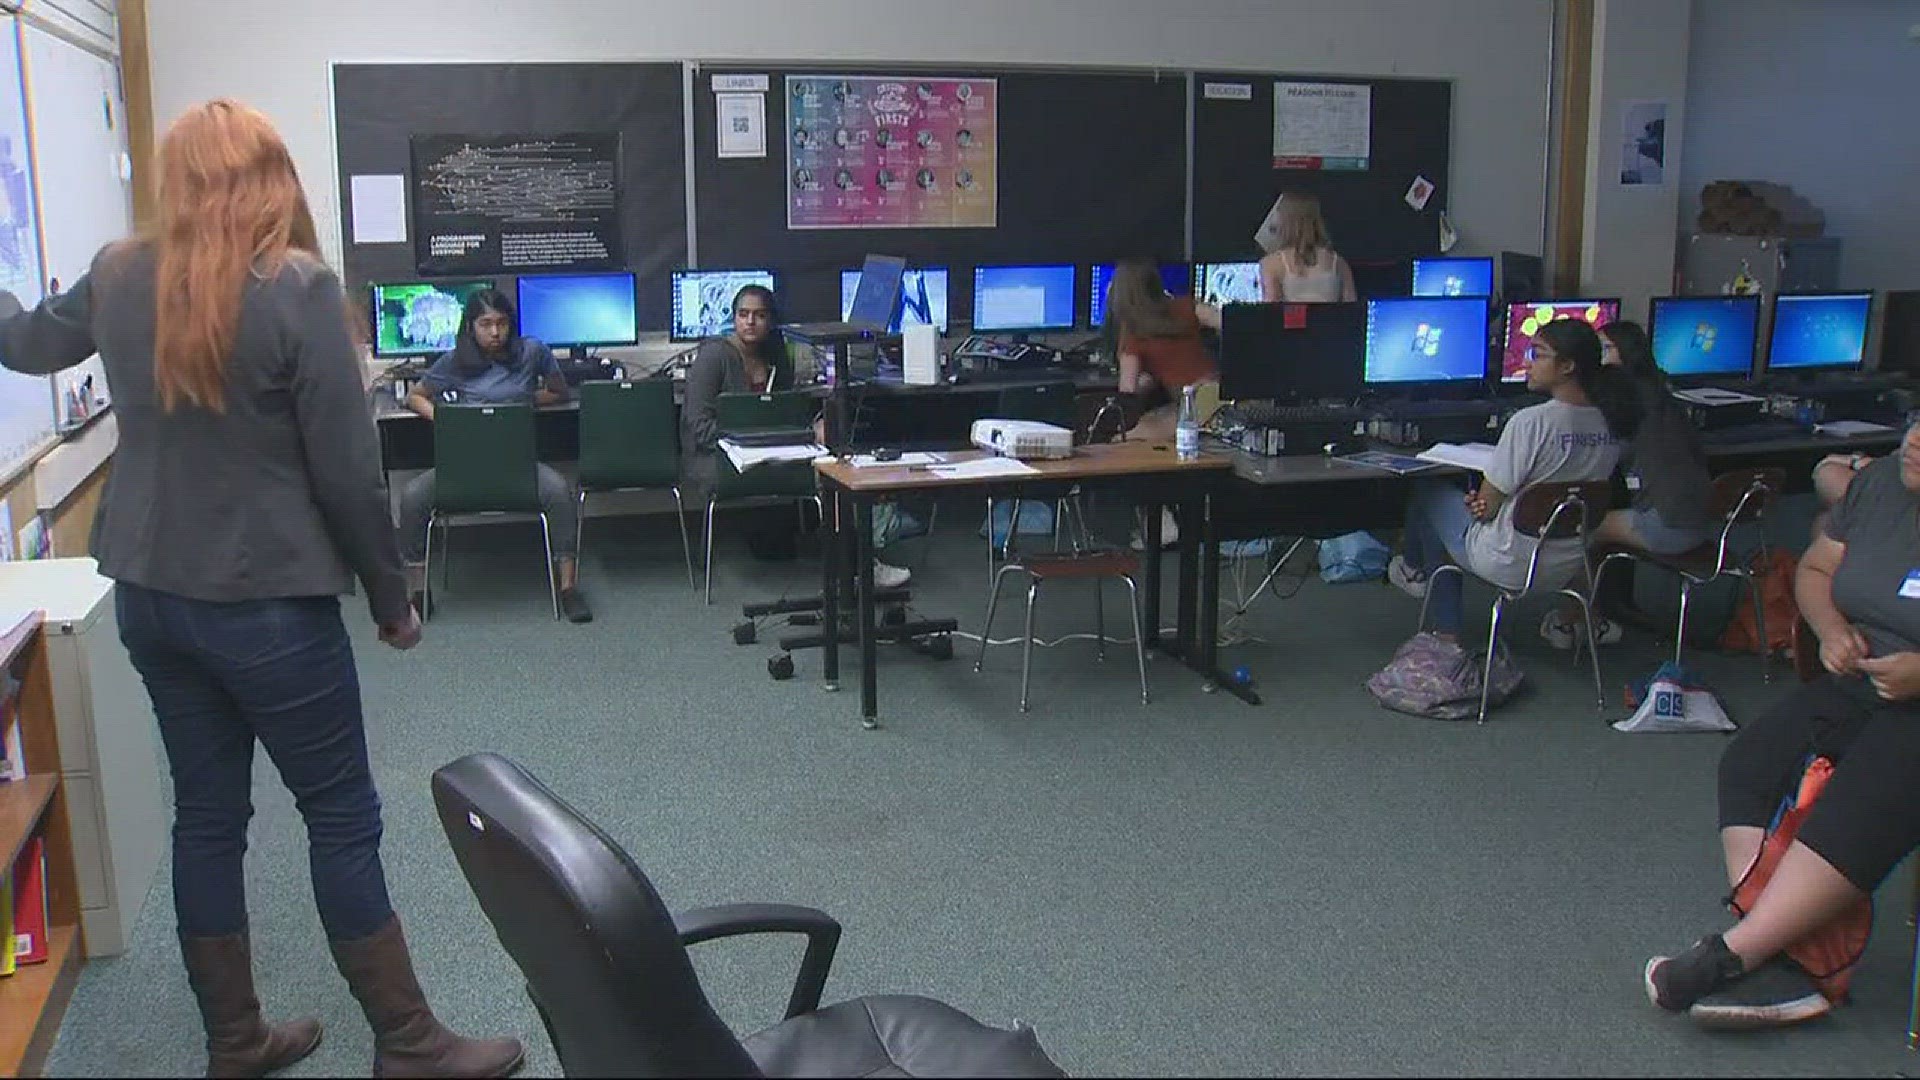 Cyber security summer camp looks to spark interest, fill jobs